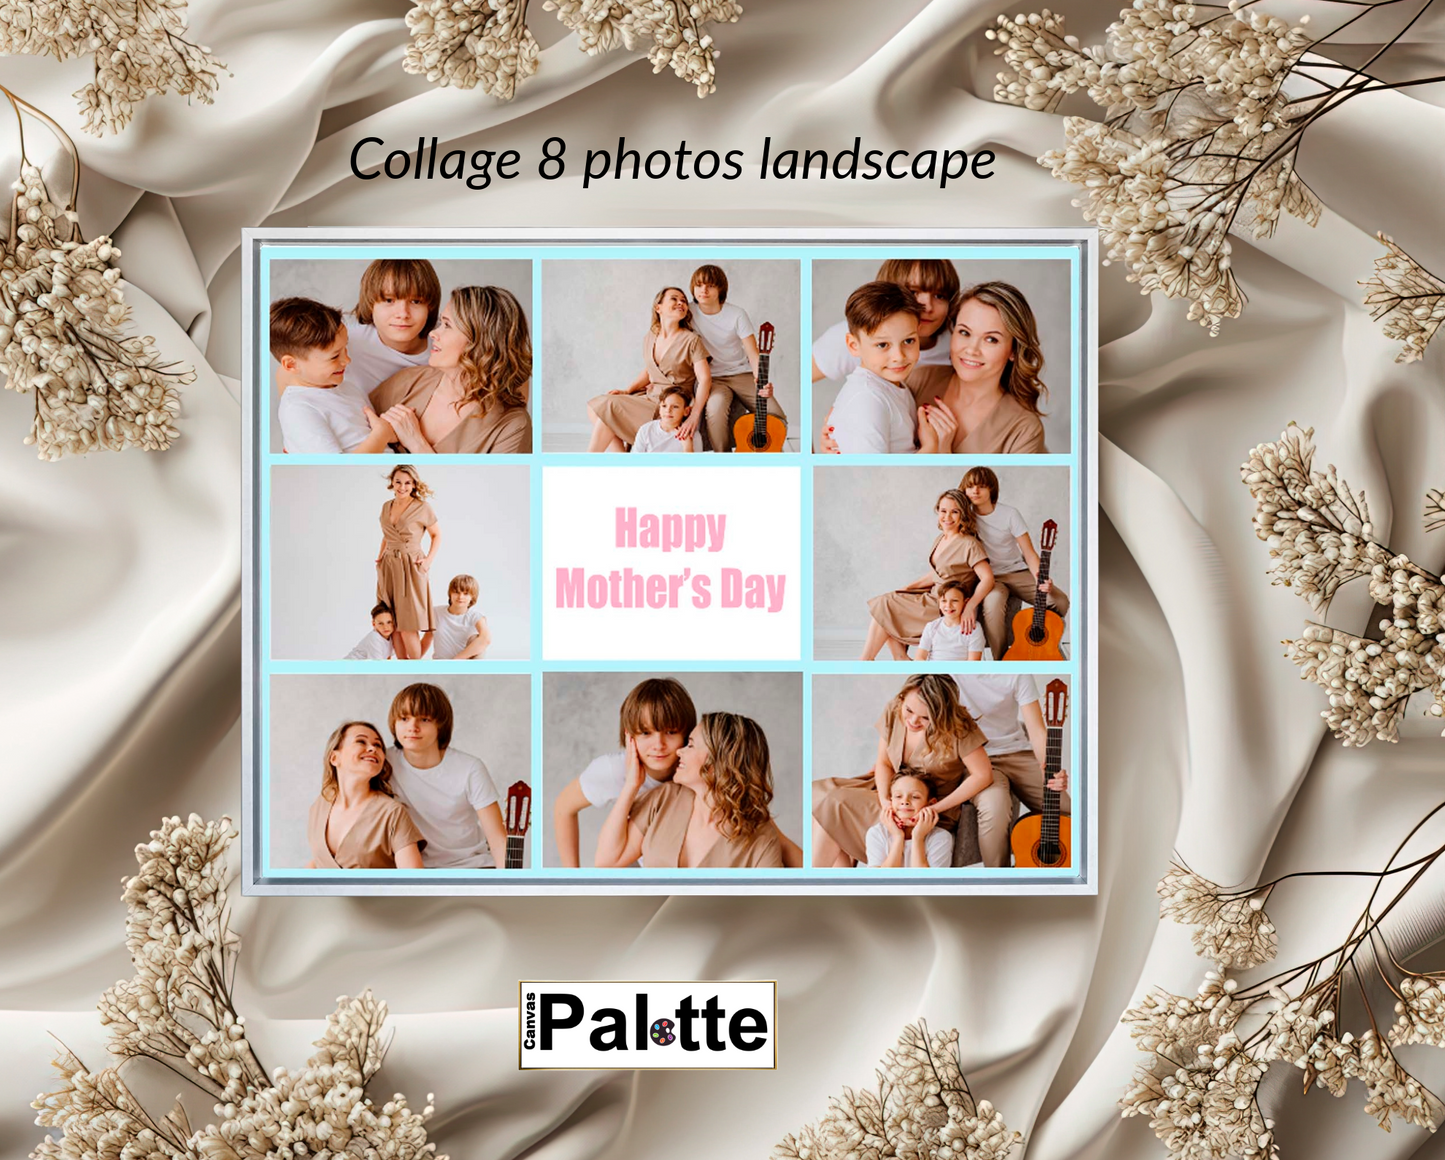 Personalised collage sample on canvas in Toronto Canada at CanvasPalette.com.  The photo shows a photo studio of a mother with her two sons. Frame brushed white.